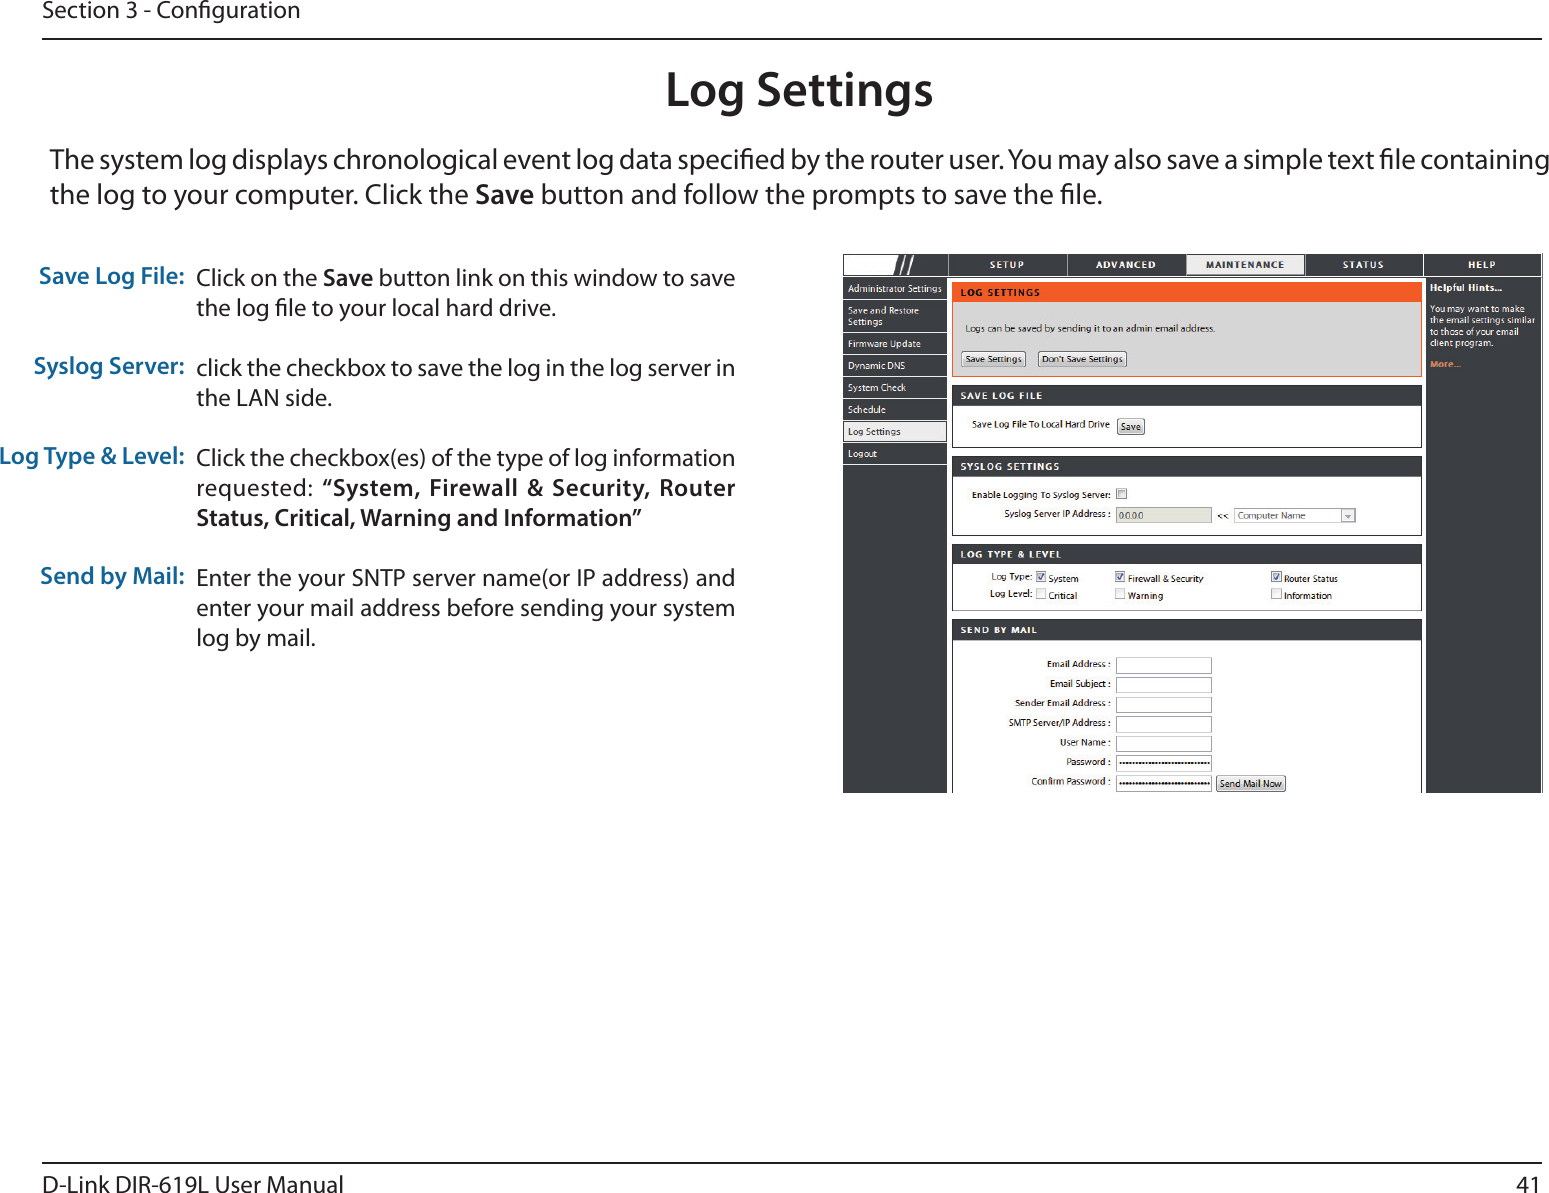 41D-Link DIR-619L User ManualSection 3 - CongurationLog SettingsClick on the Save button link on this window to save the log le to your local hard drive.click the checkbox to save the log in the log server in the LAN side.Click the checkbox(es) of the type of log information requested: “System,  Firewall  &amp;  Security,  Router Status, Critical, Warning and Information”Enter the your SNTP server name(or IP address) and enter your mail address before sending your system log by mail.Save Log File:Syslog Server:Log Type &amp; Level:Send by Mail:The system log displays chronological event log data specied by the router user. You may also save a simple text le containing the log to your computer. Click the Save button and follow the prompts to save the le.DIR-619L